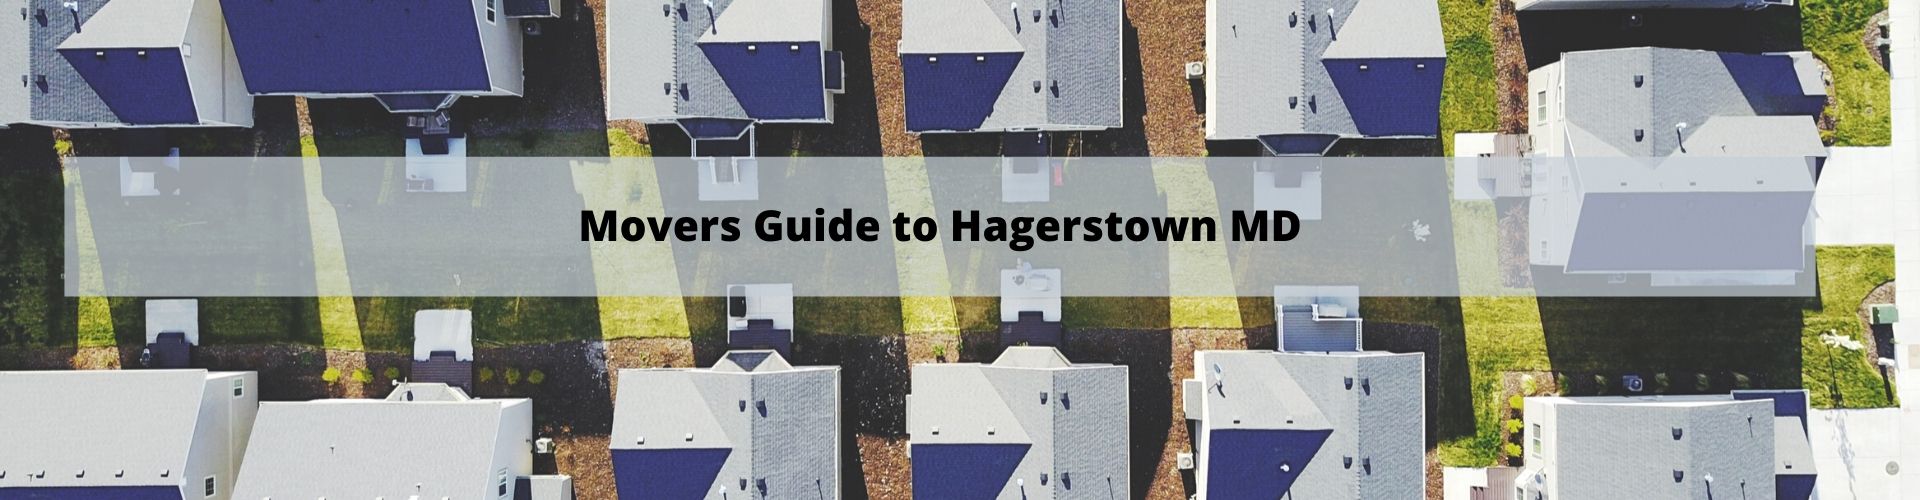 Movers Guide to Hagerstown MD